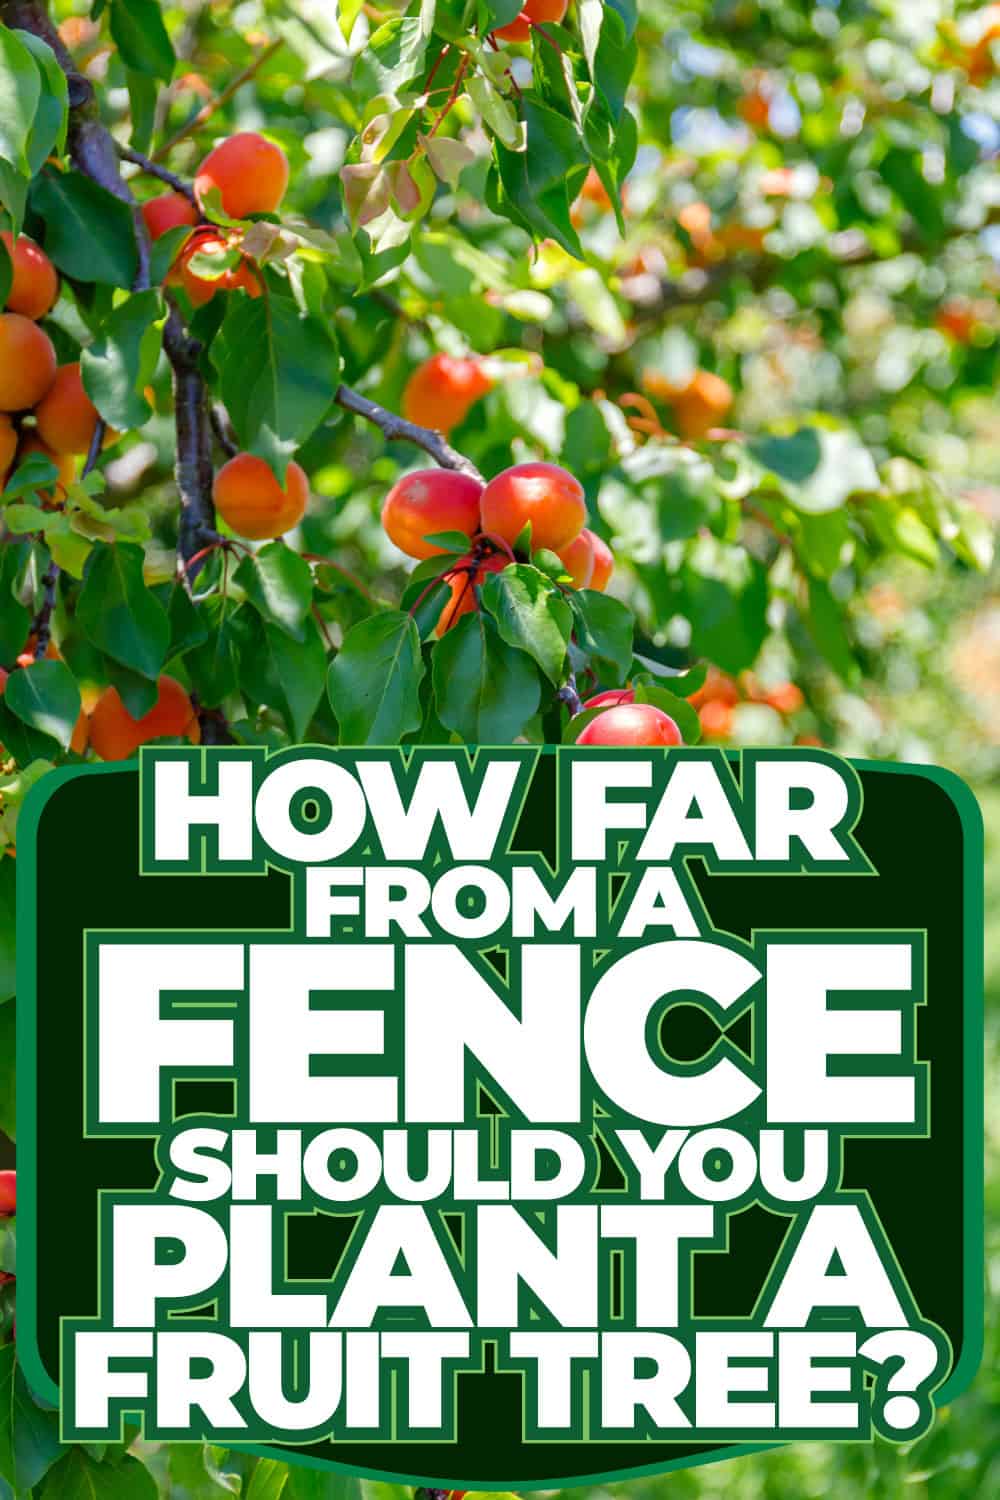 How Far From A Fence Should You Plant A Fruit Tree?